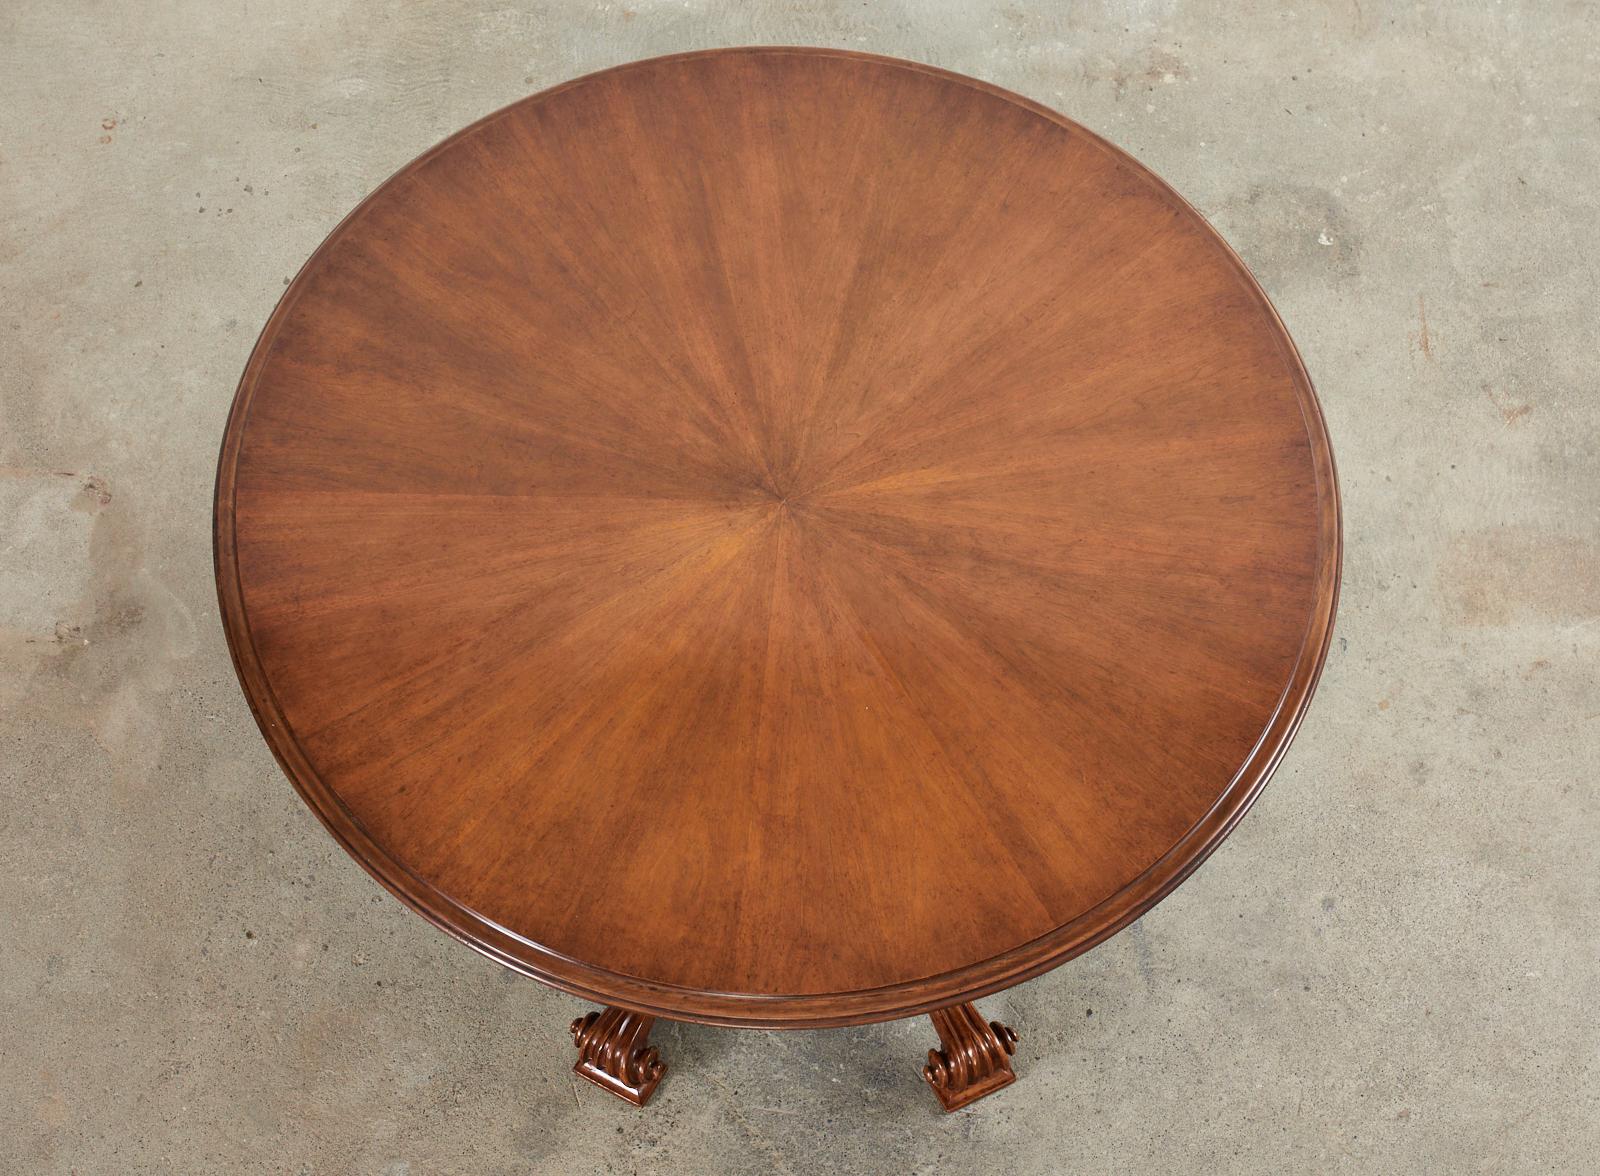 Hand-Crafted Therien Studio Workshop Walnut Volute Dining Table with Leaves